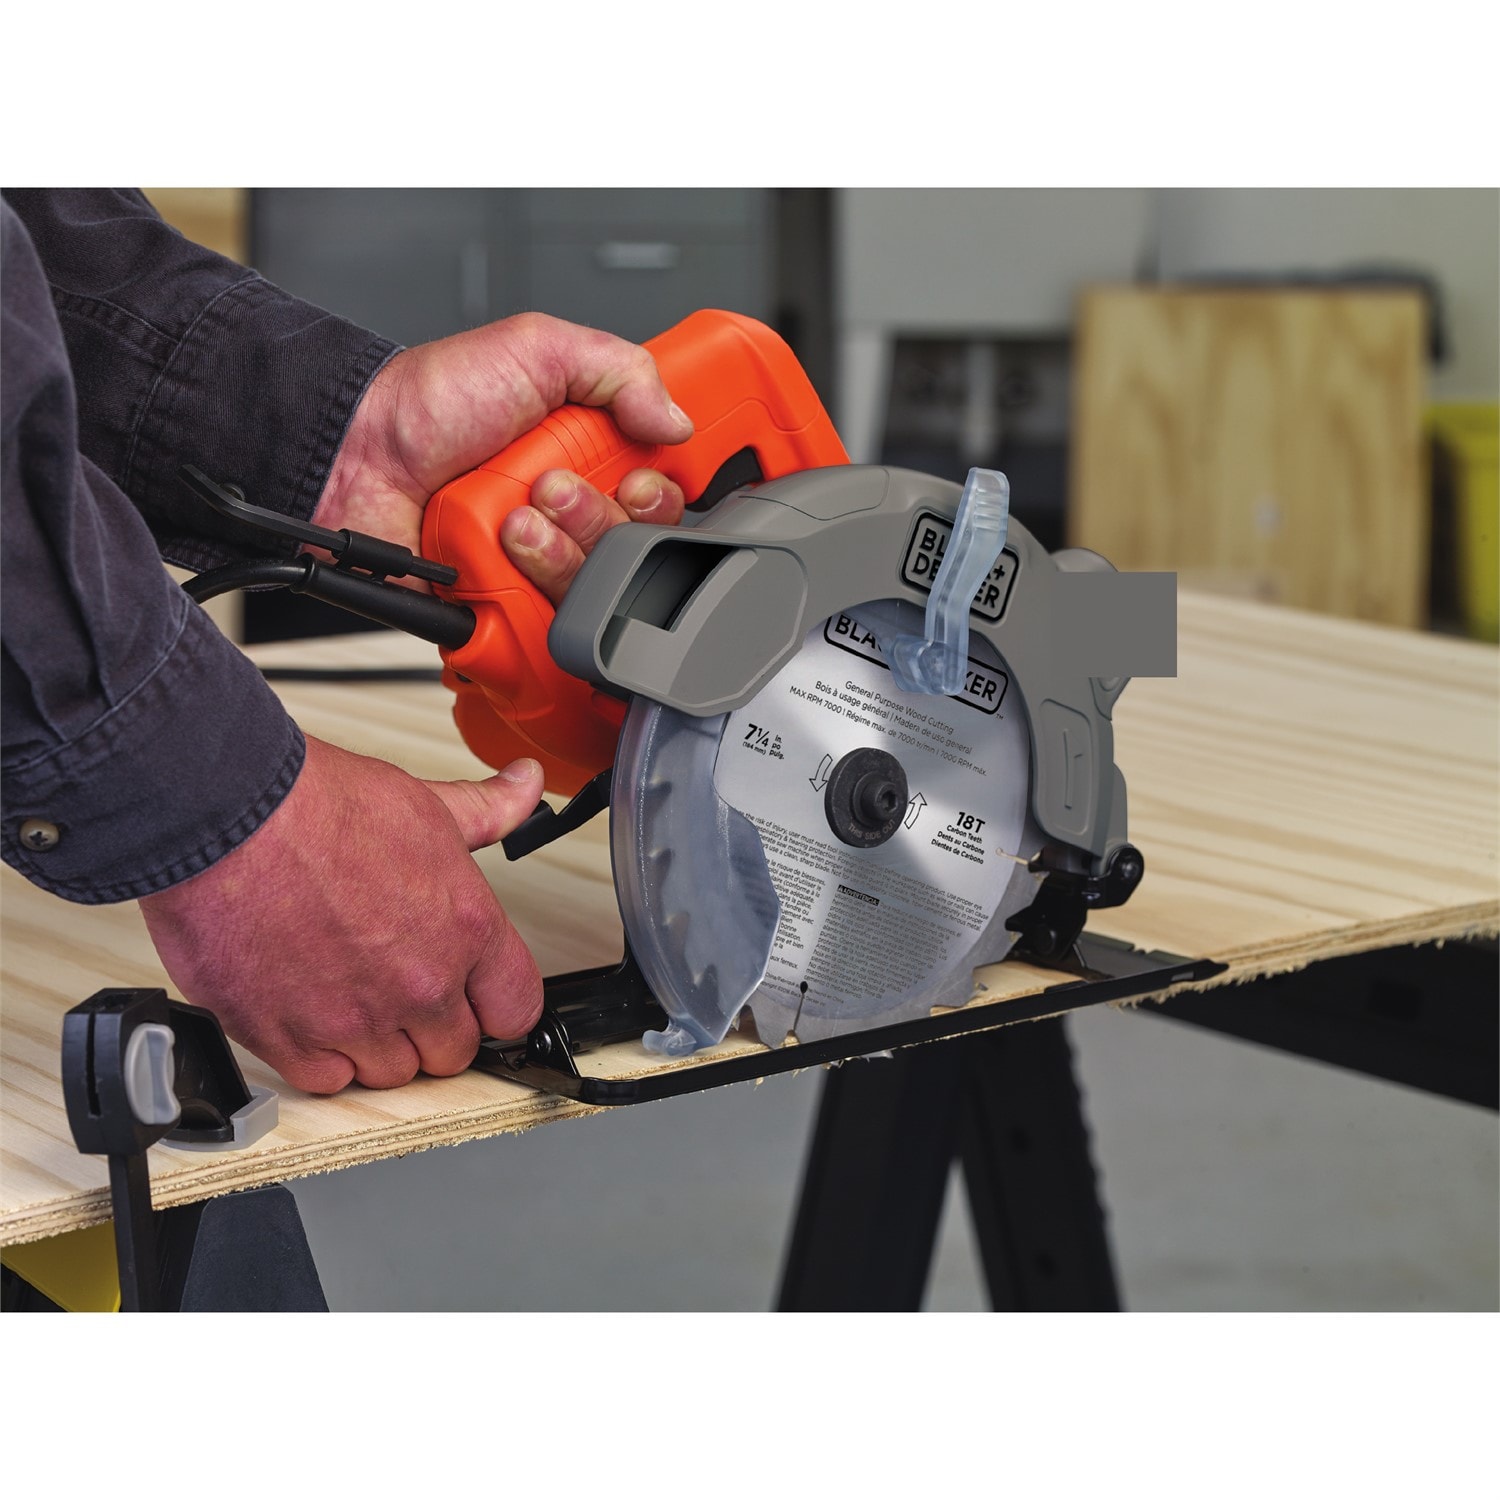 Black & Decker RS150 type 1 Rotary Saw Corded Electric